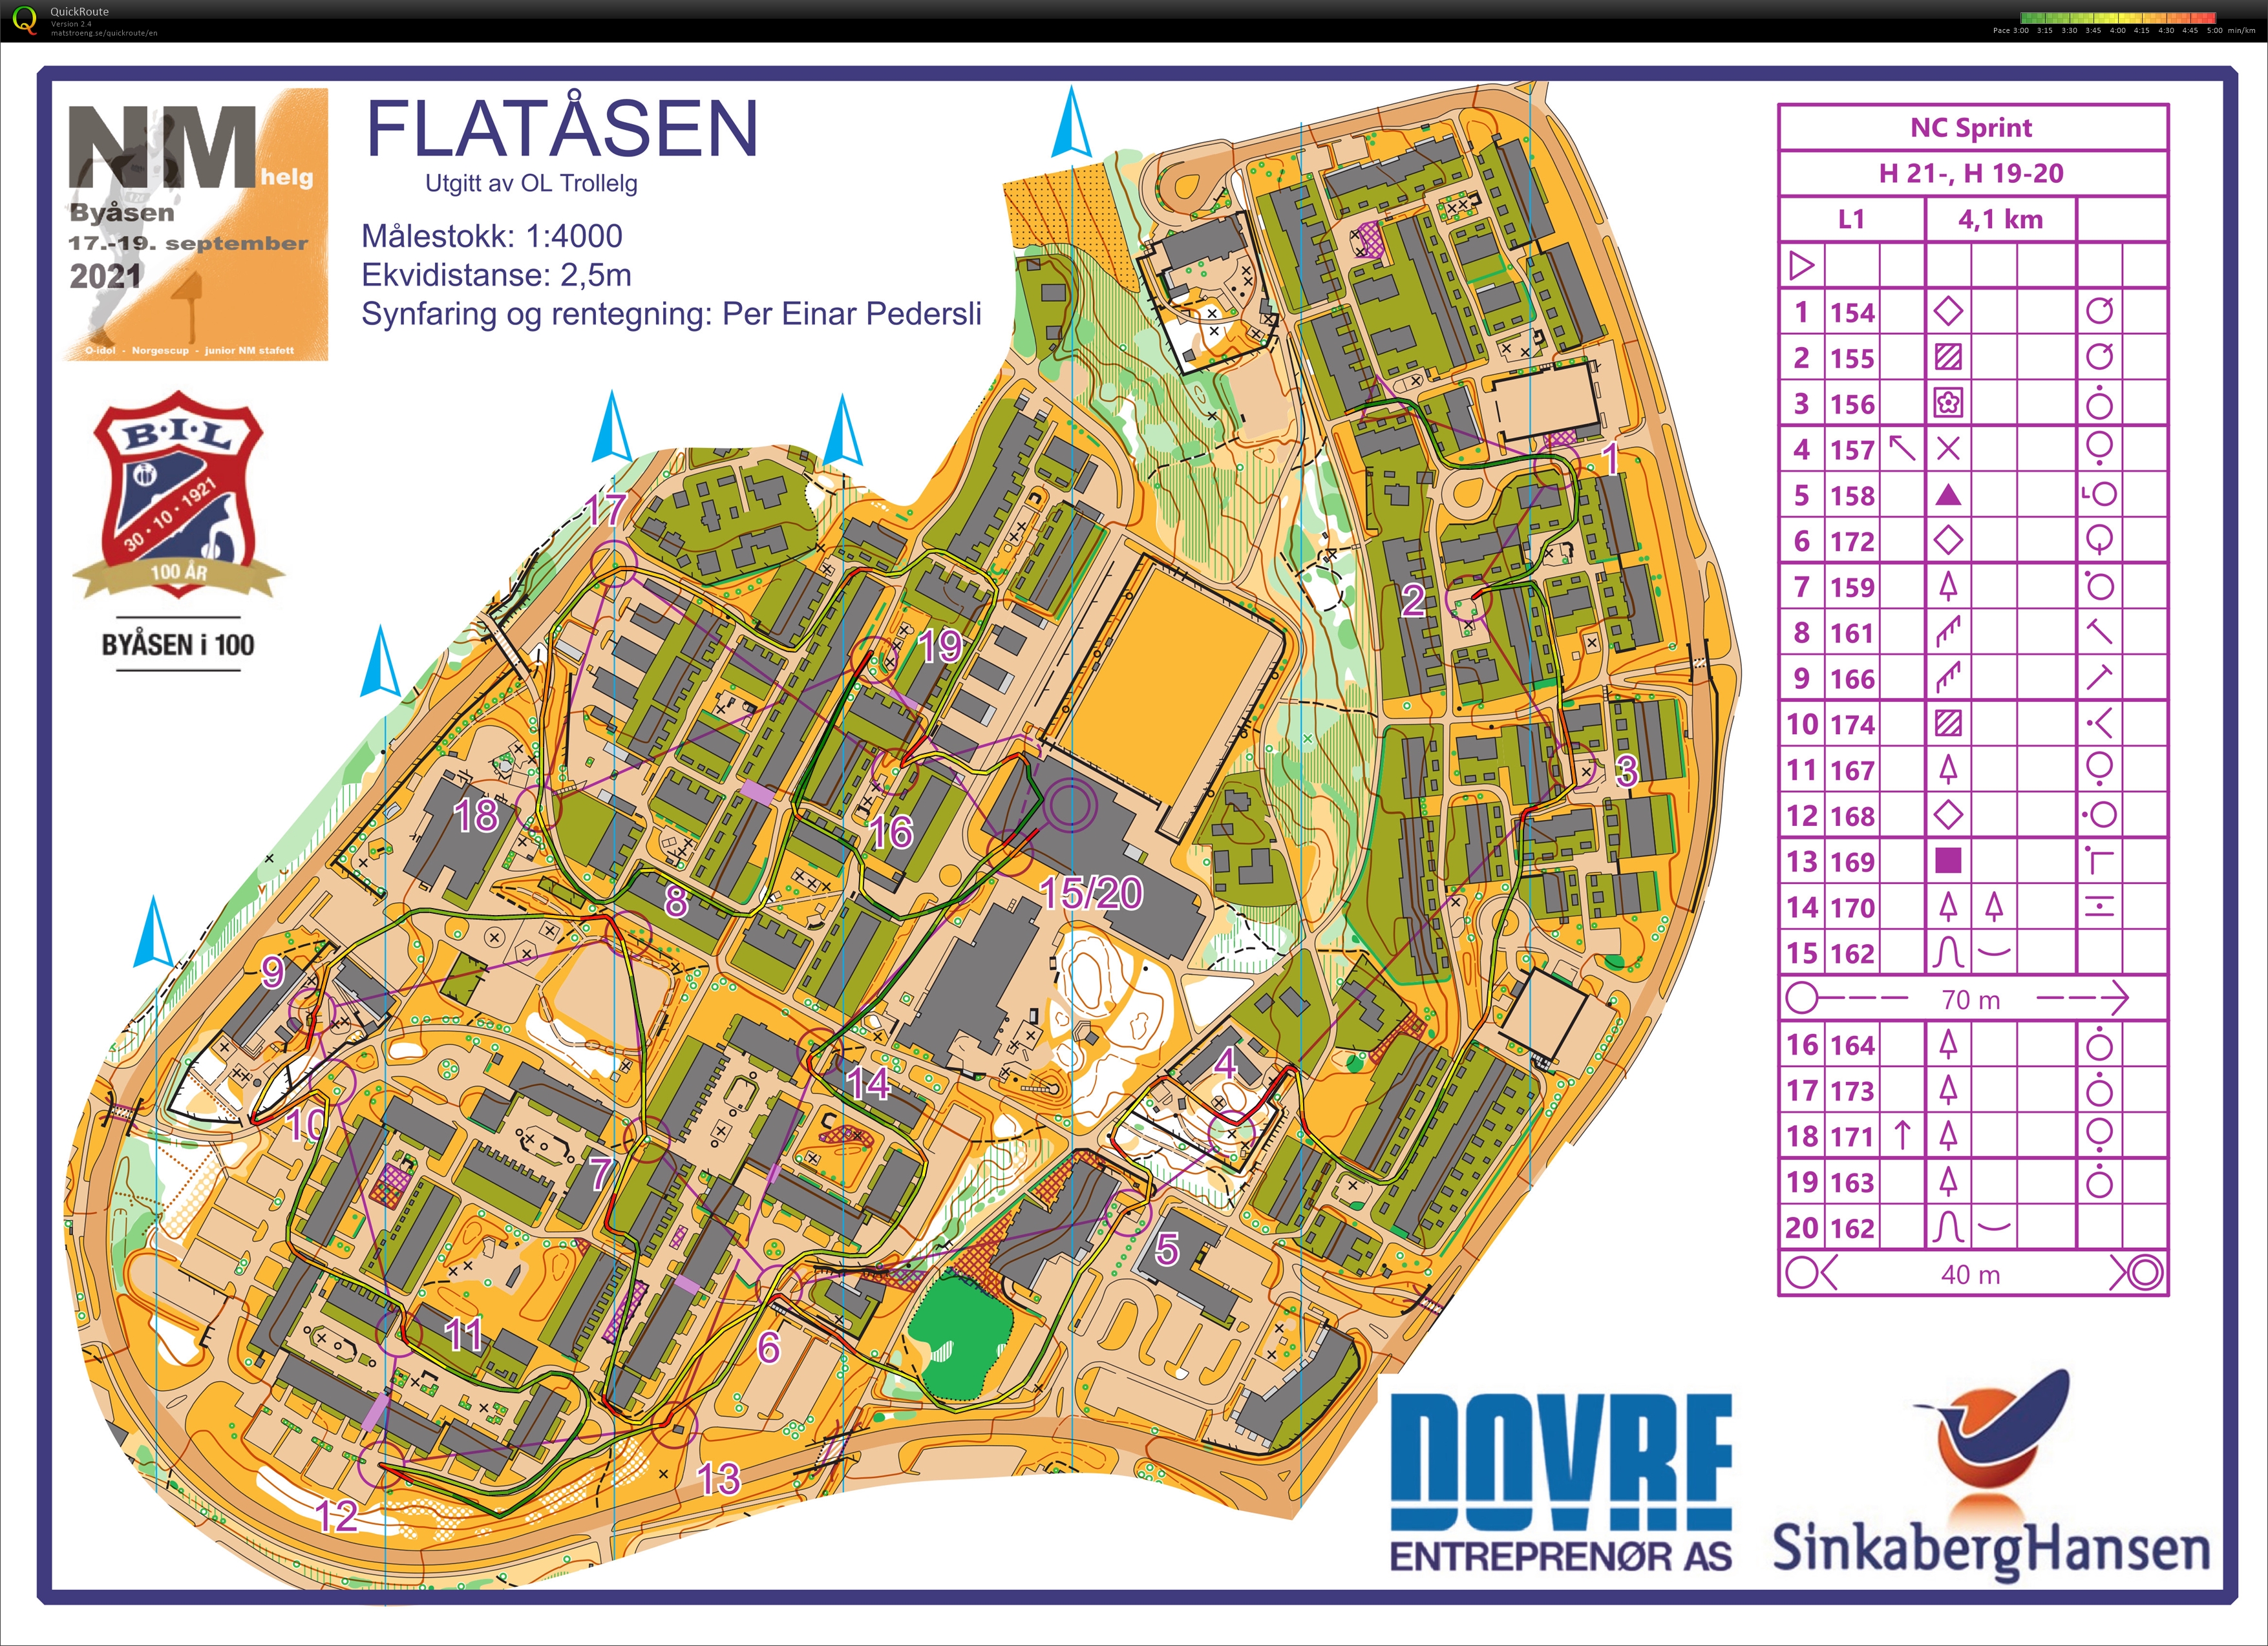 Norgescup Sprint (17-09-2021)